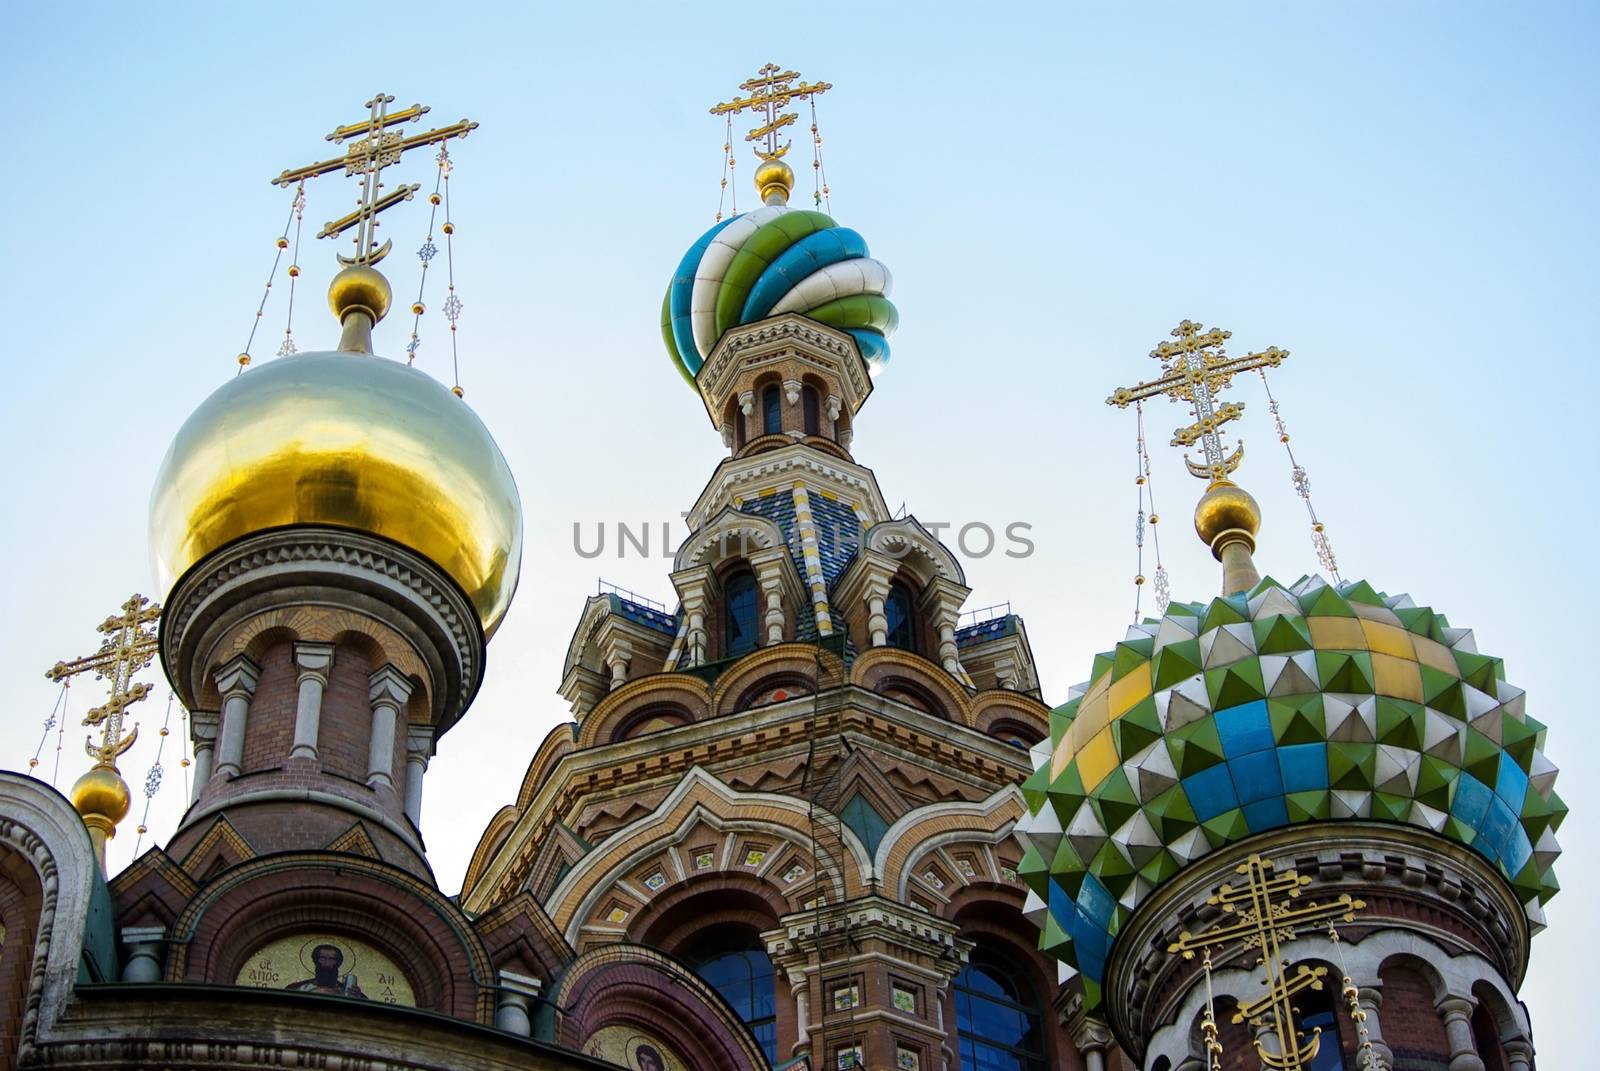 Details of the Our Saviour on Spilled Blood cathedral in Saint-Petersburg, Russia